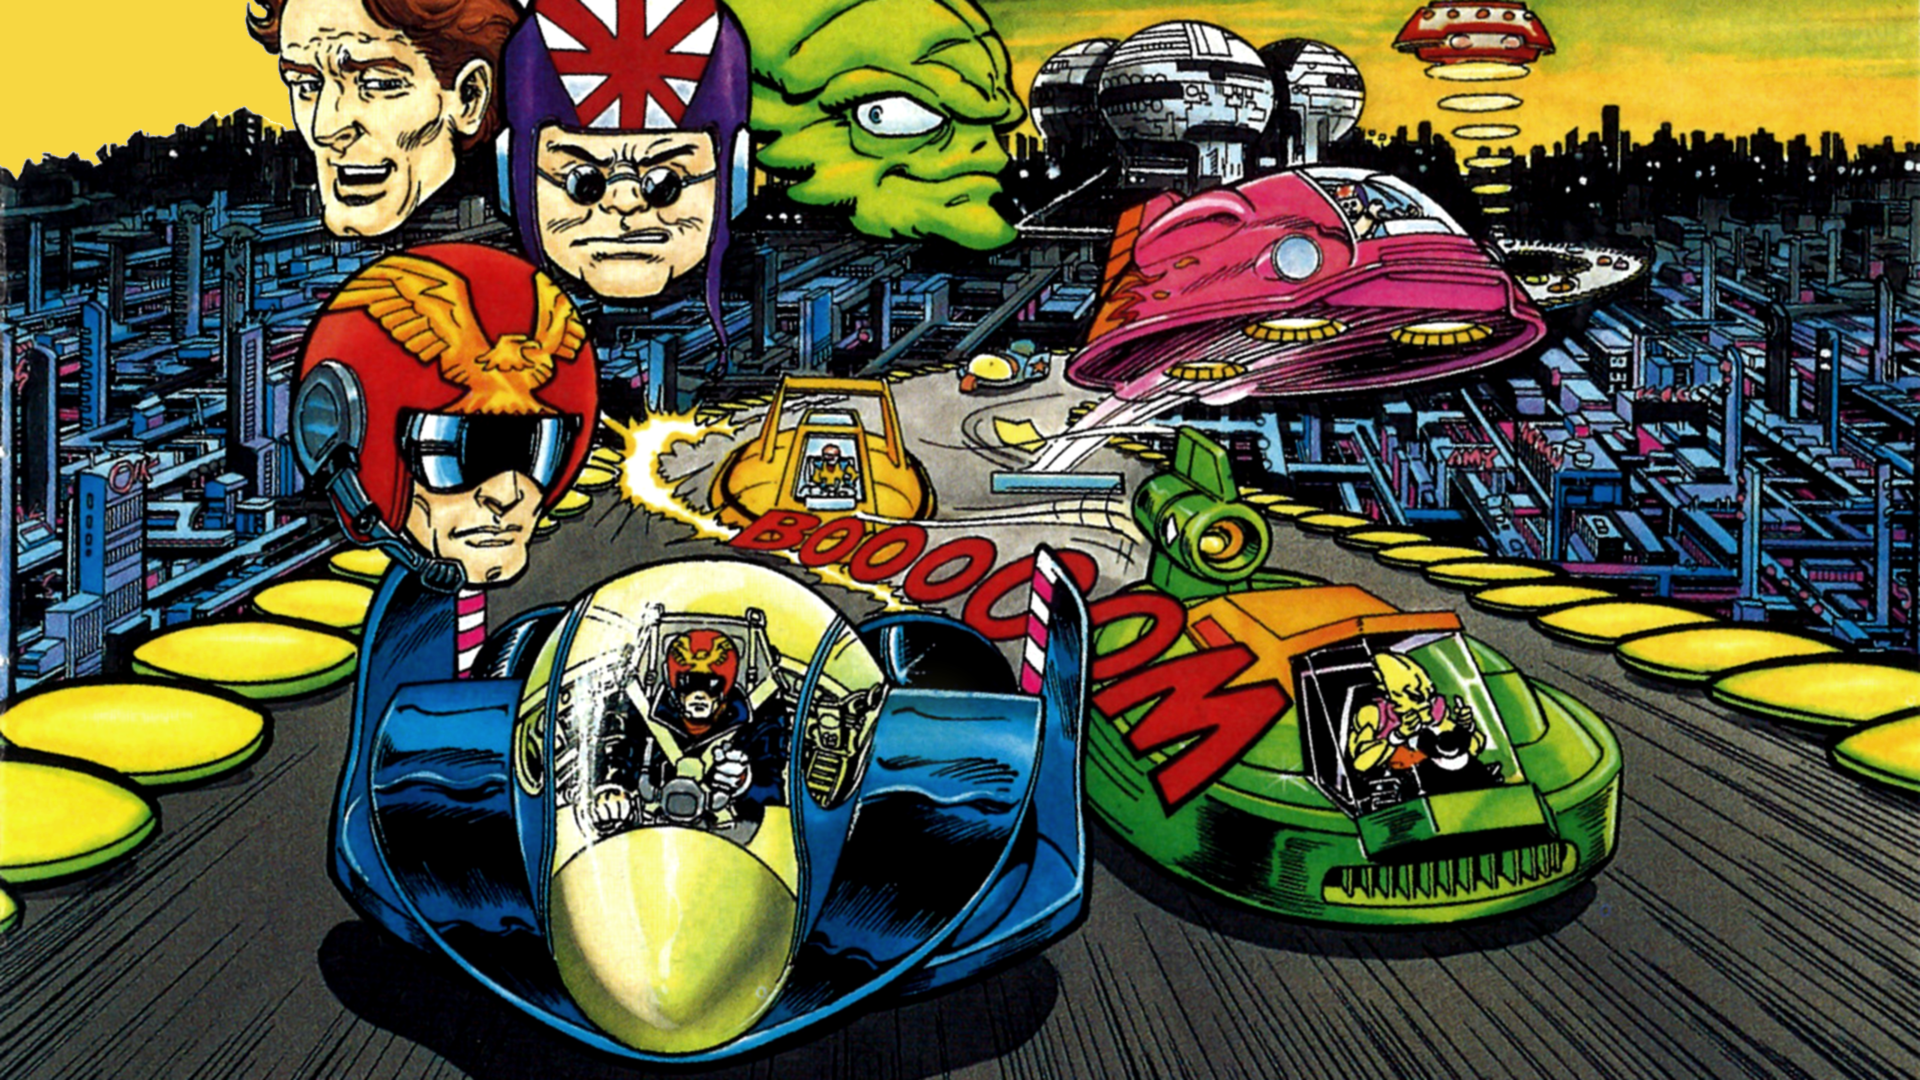 How the F-Zero Anime Could Inspire a New F-Zero Game